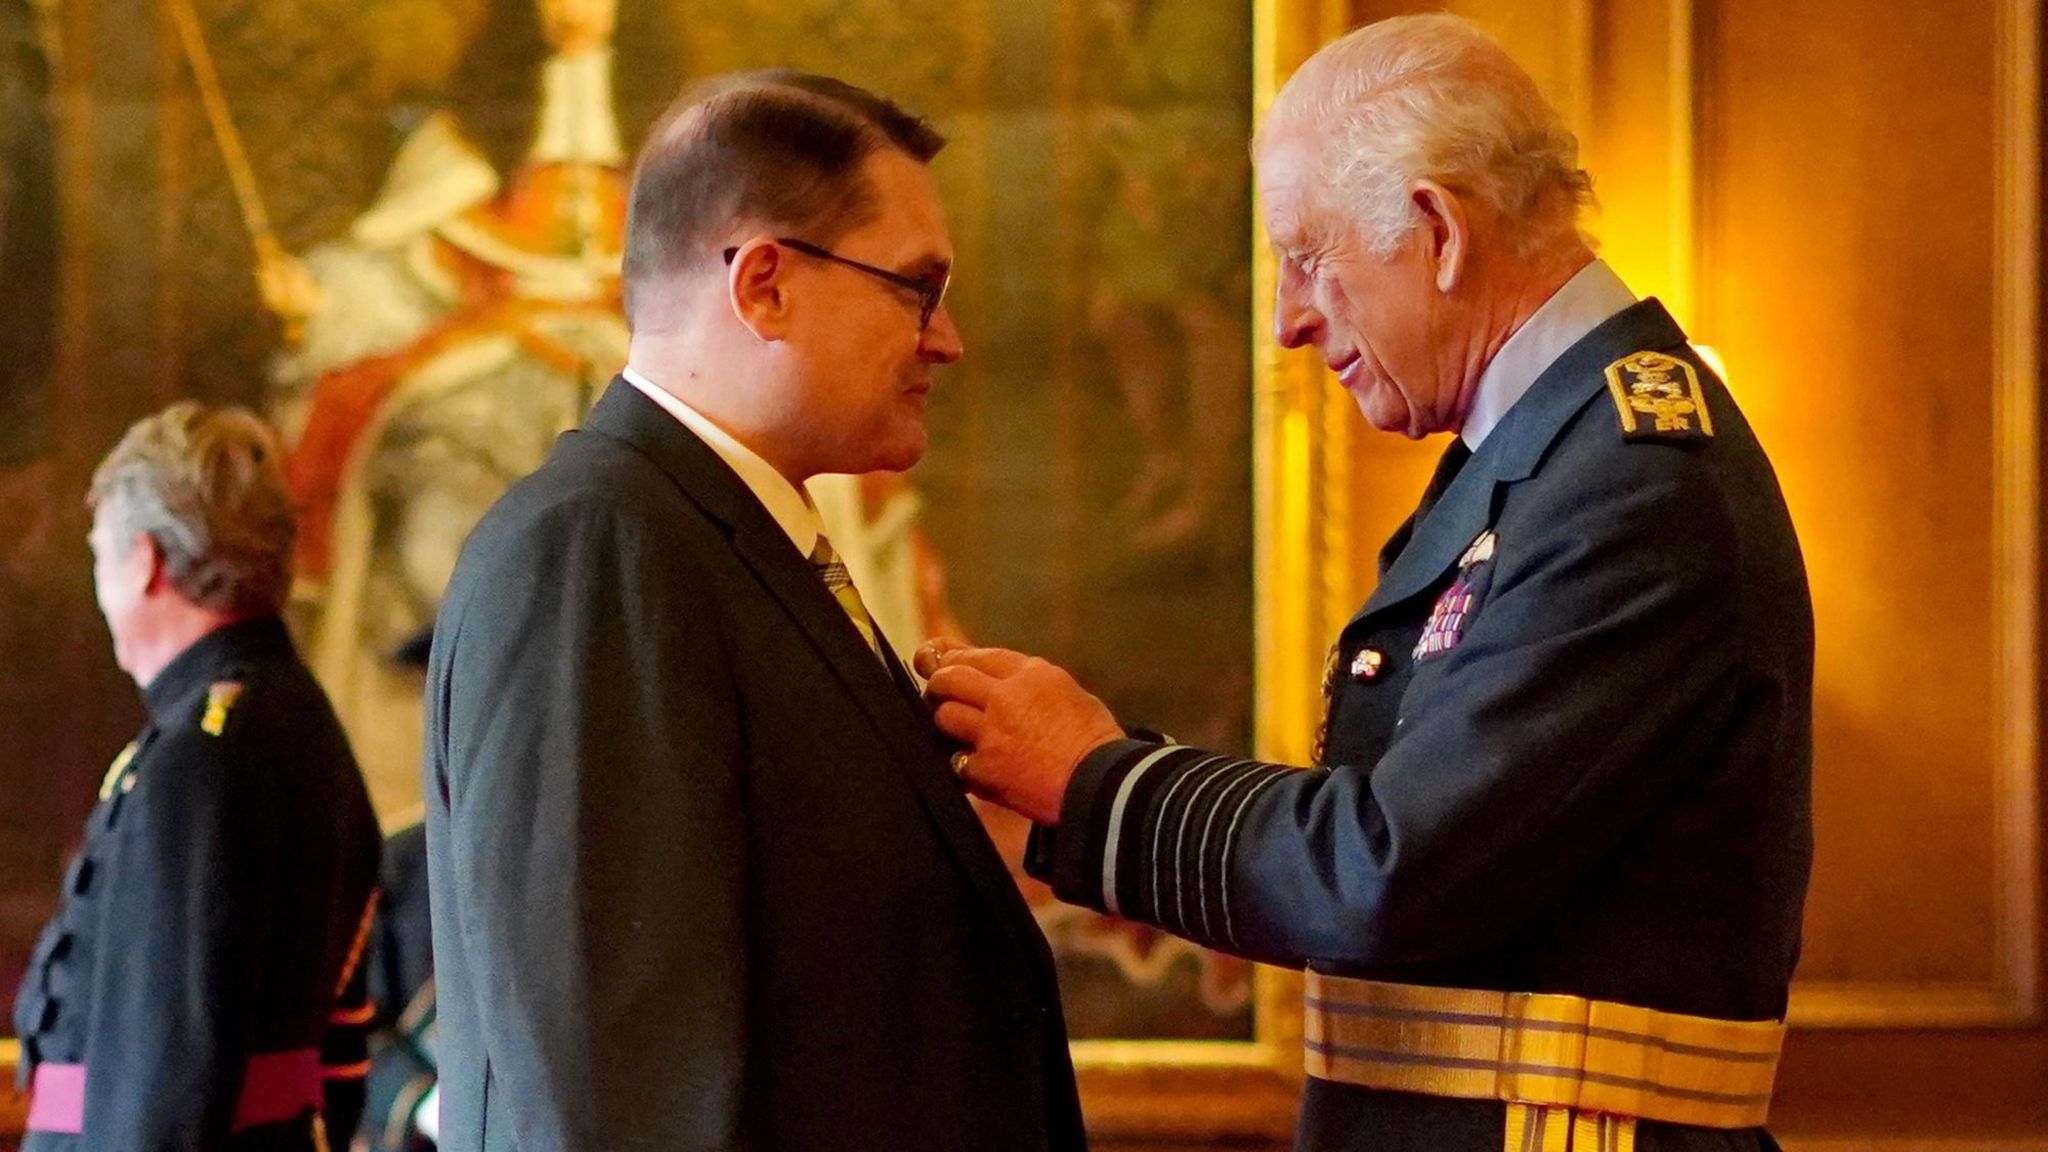 Professor Paul Mealor, from Aberdeen, is made a Lieutenant of the Royal Victorian Order by King Charle